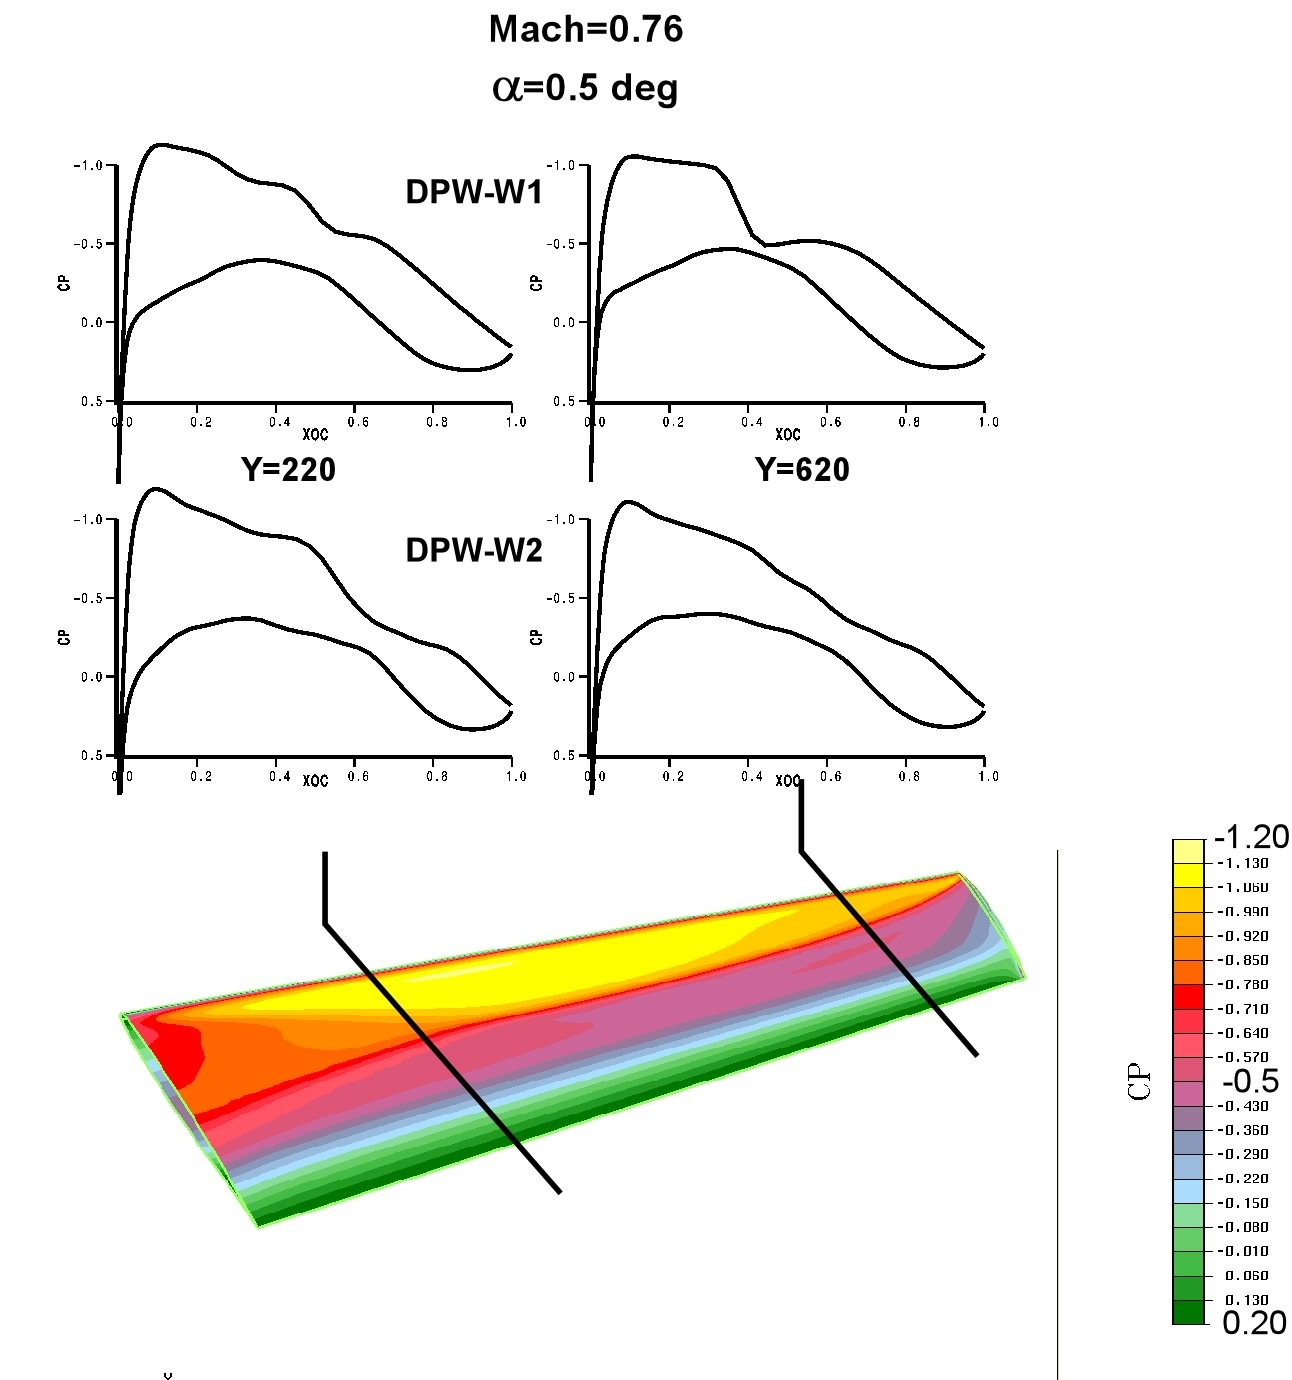 Image of sample data results showing plots of cp versus cord at two locations, includes a color image of top of wing with contour lines